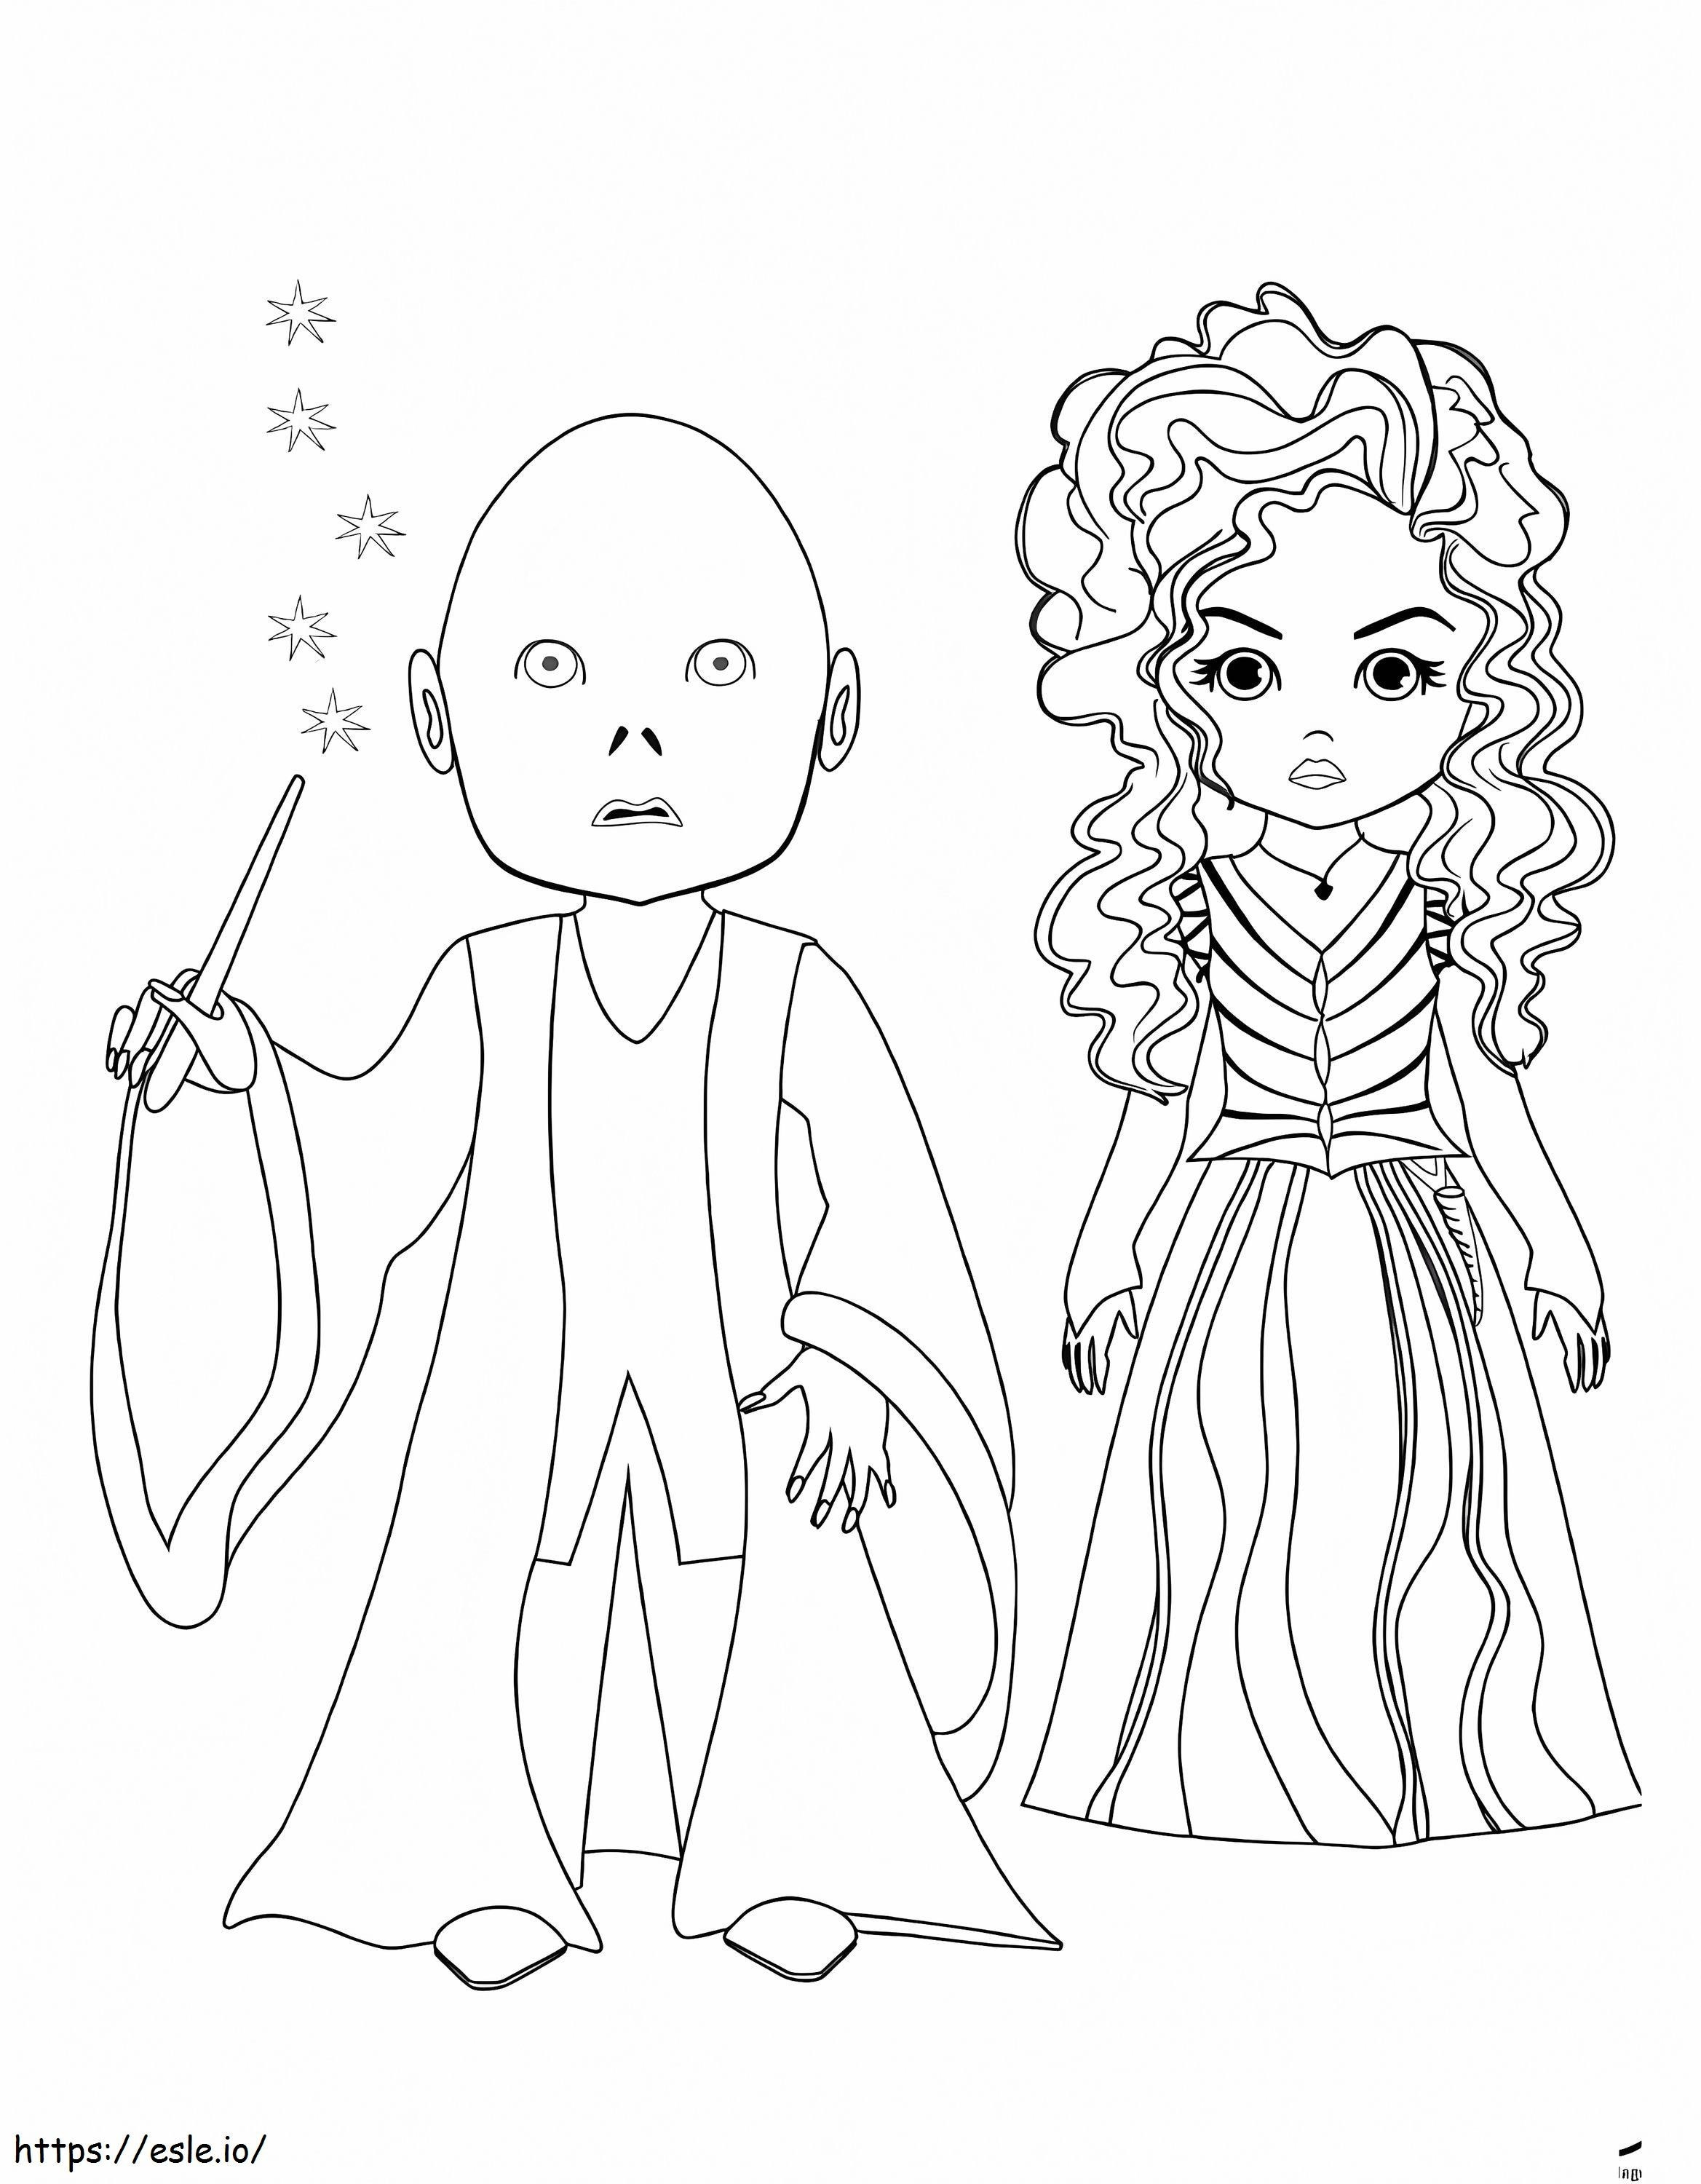 Voldemort And Warrior coloring page